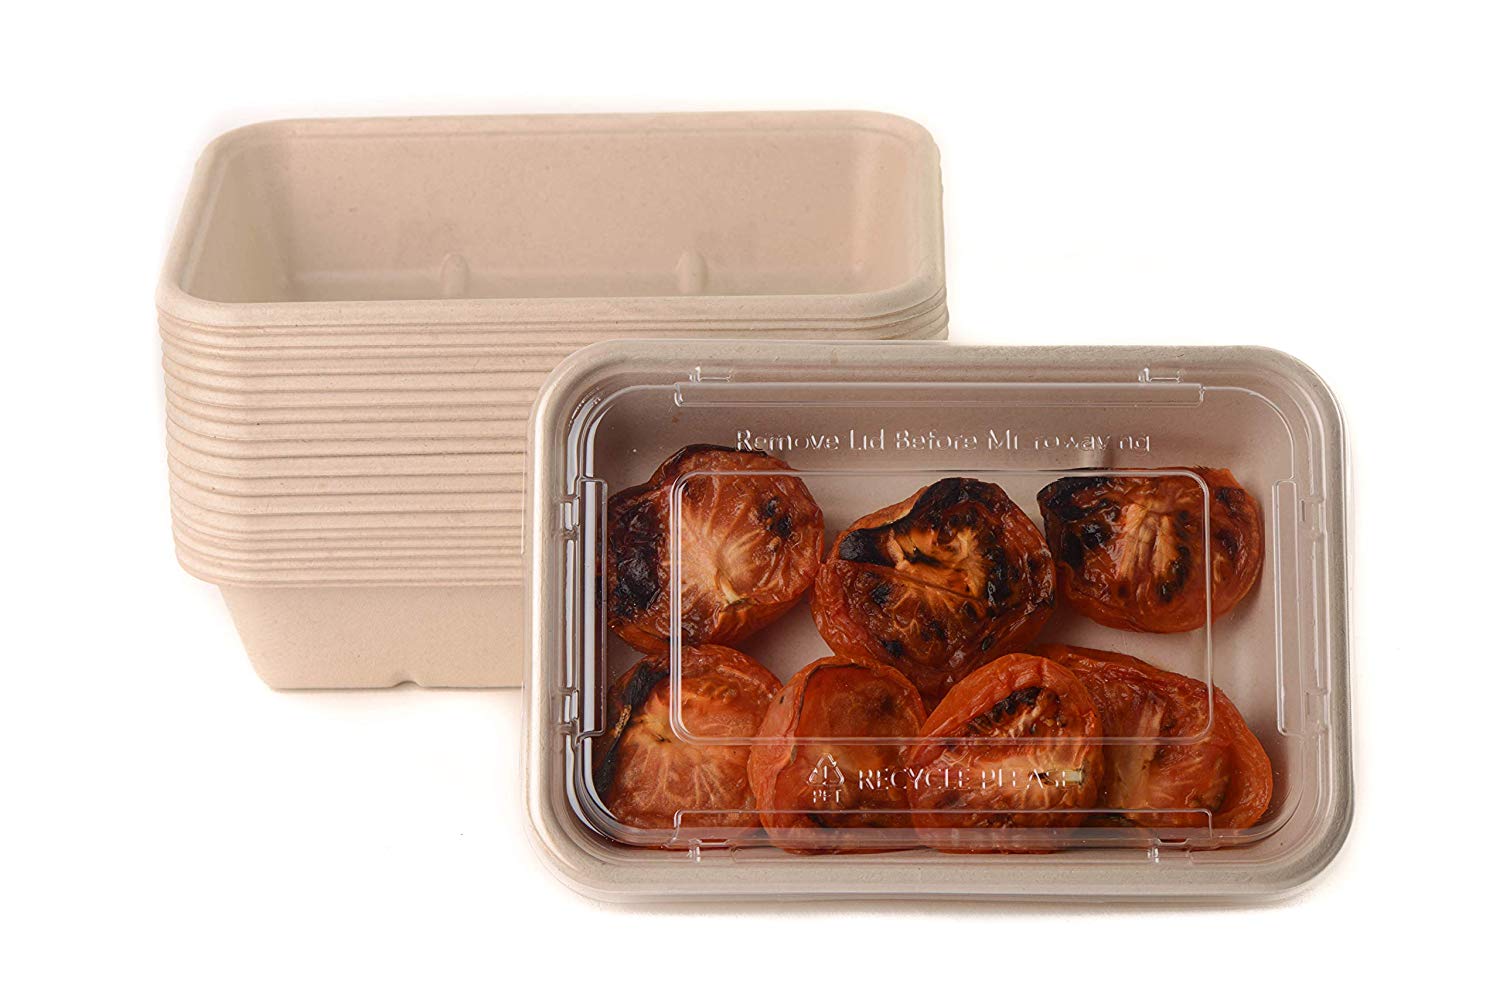 Meal Prep Heavy Duty Leak Spill Proof Free  Grease and Leak Resistant Proof  container with lid  To Go Take Out  Restaurant Food Trucks Caterers take out sustainable  Container Tray  Compostable Tray  Compostable Biodegradable Sugarcane Bagasse  affordable bulk economical commercial wholesale nyc supplies ecoquality ecofriendly sustainable